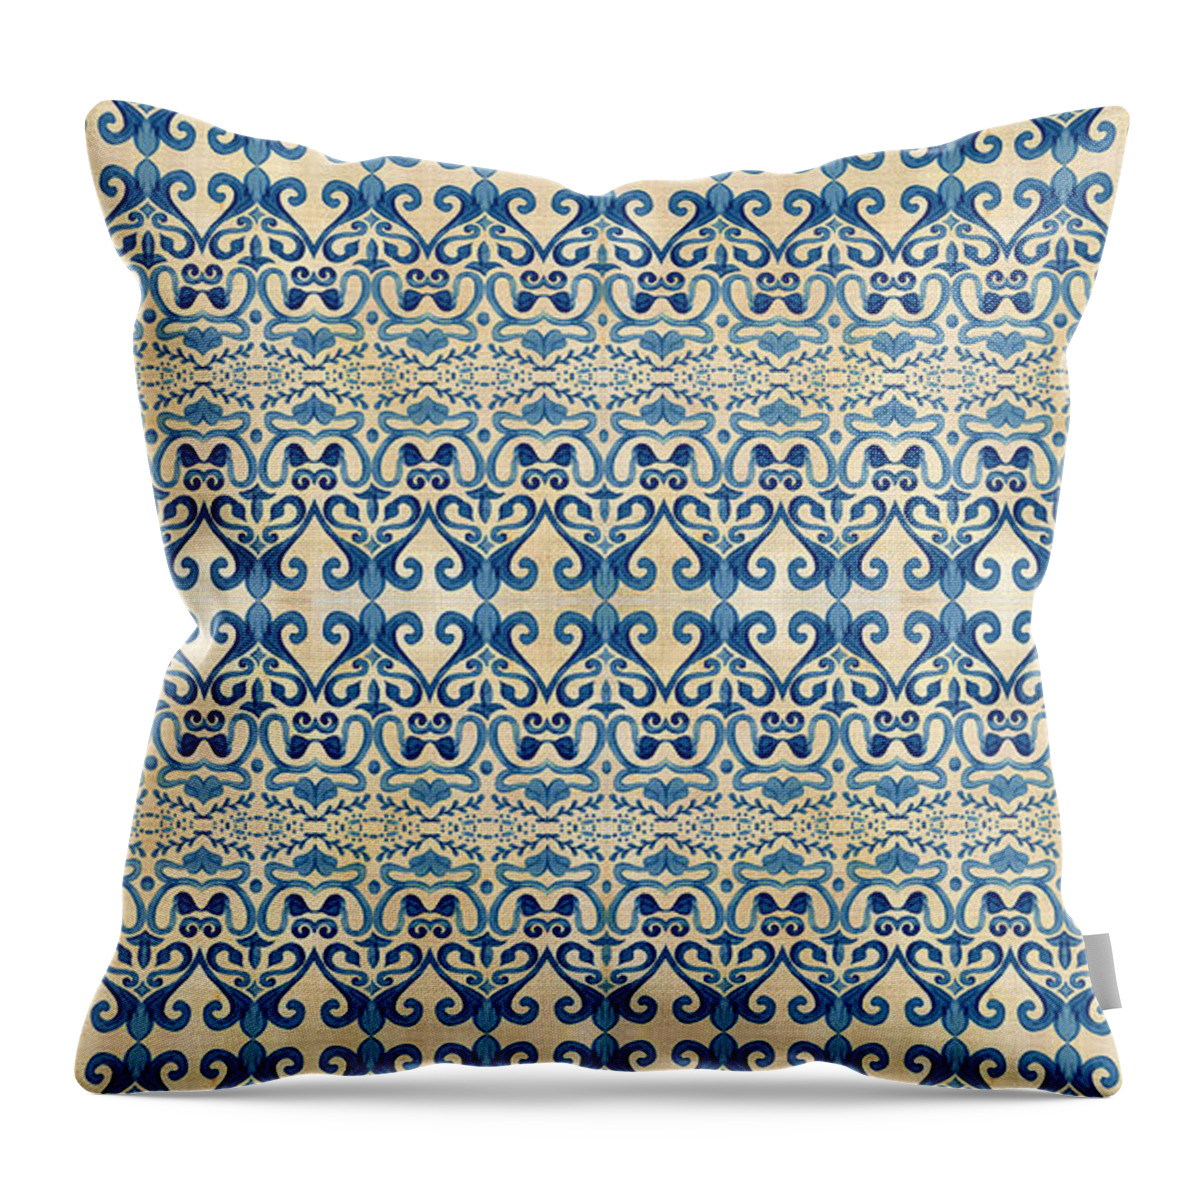 Repeat Pattern Throw Pillow featuring the painting Indigo Ocean - Caribbean Tile Inspired Watercolor swirl Pattern by Audrey Jeanne Roberts